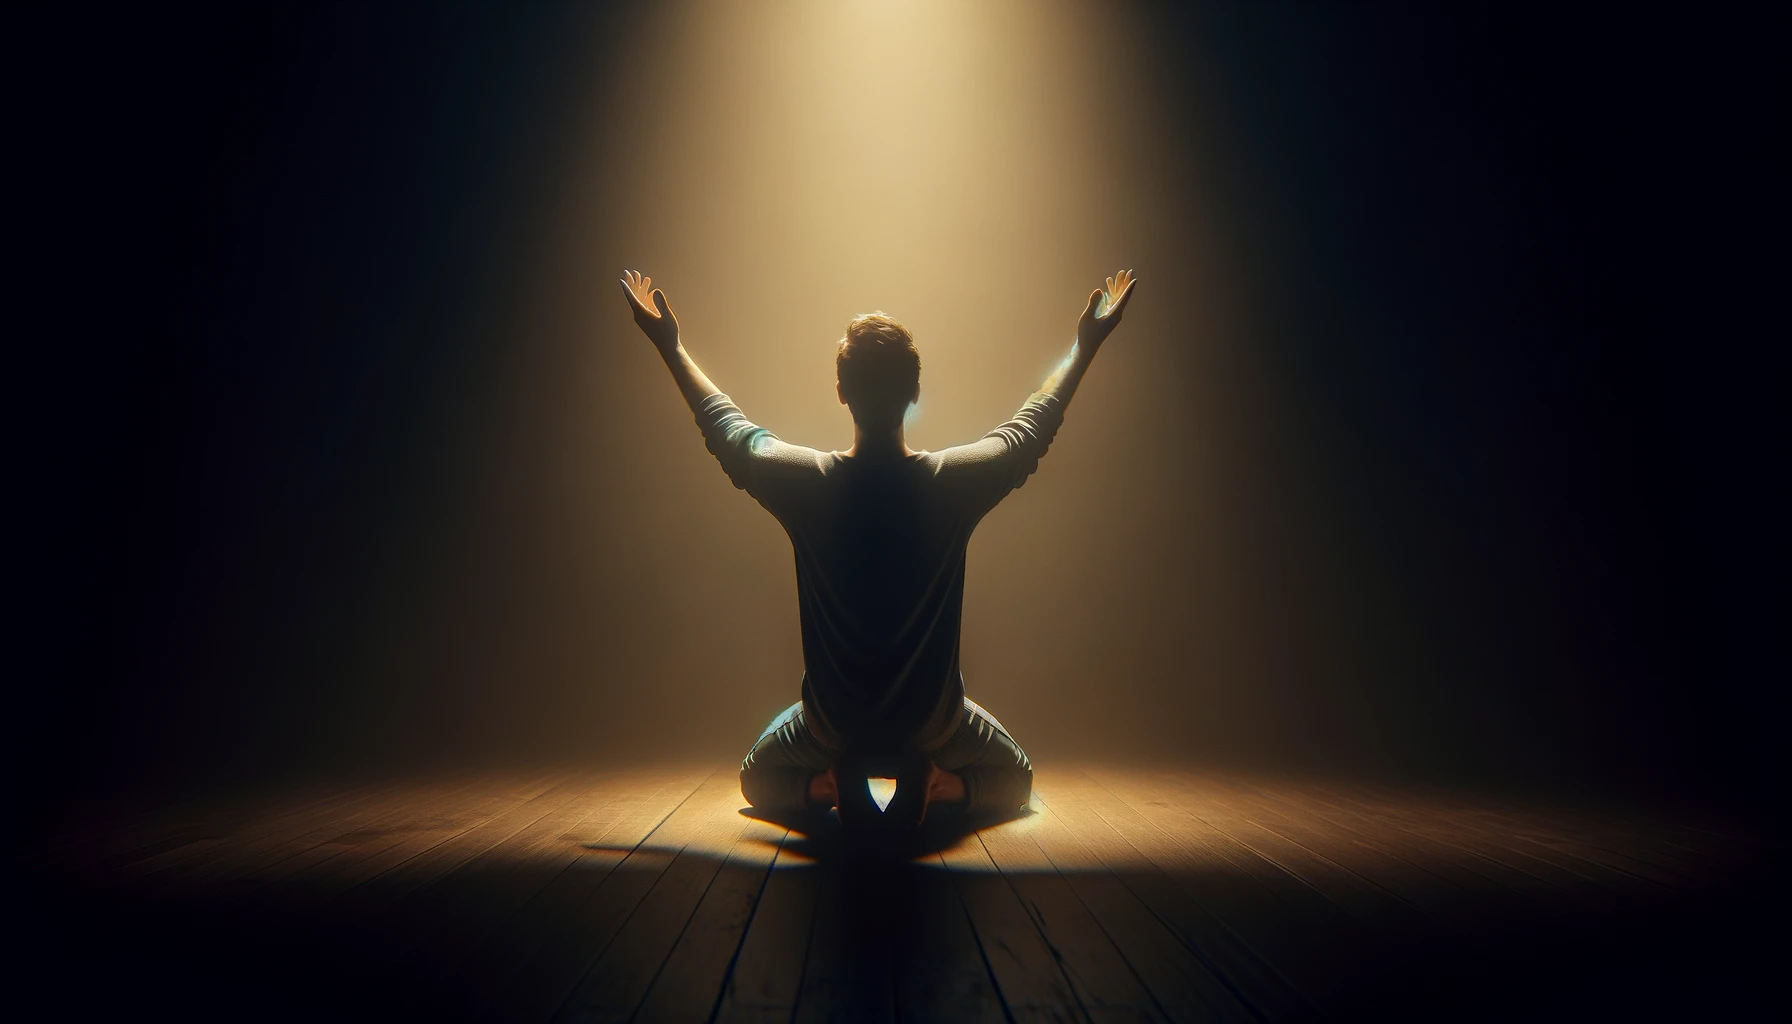 A person kneeling with open hands facing upward, illuminated by a soft light. This composition emphasizes a moment of surrender, reflection, or prayer.